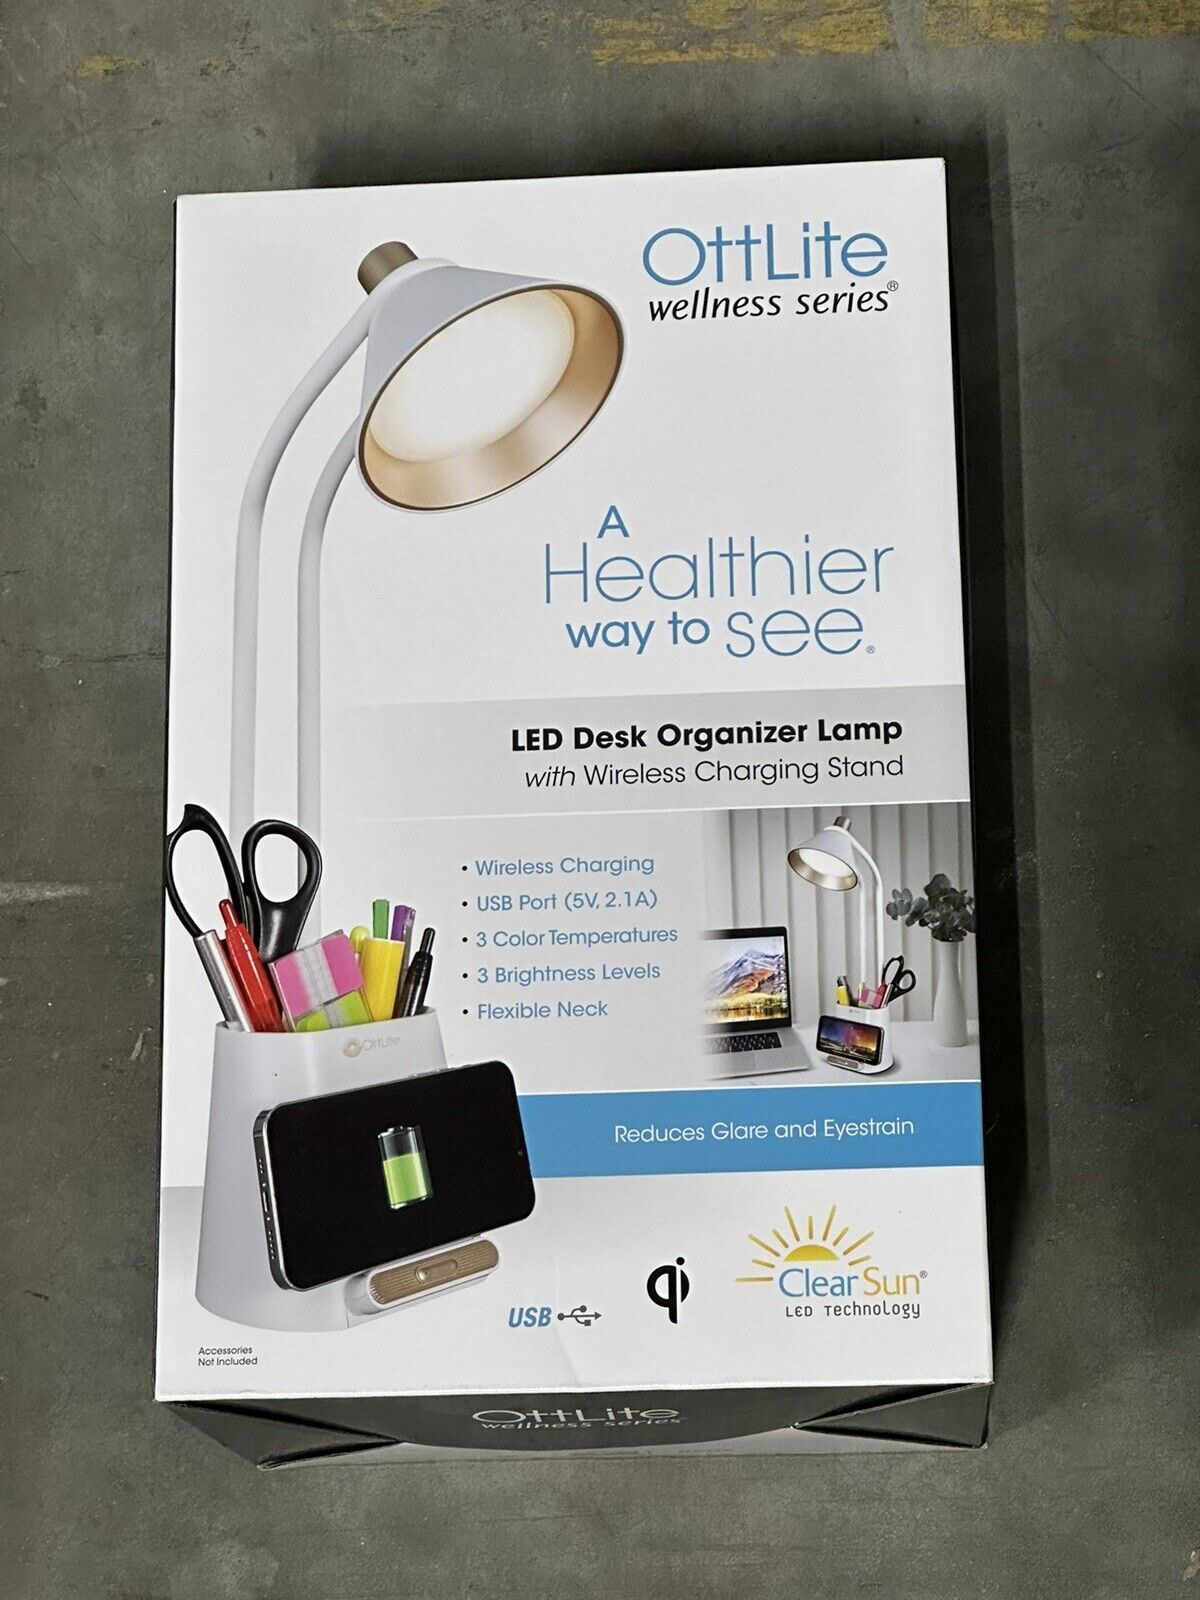 OttLite LED Desk Organizer Lamp with Wireless Charging Stand - OPEN BOX